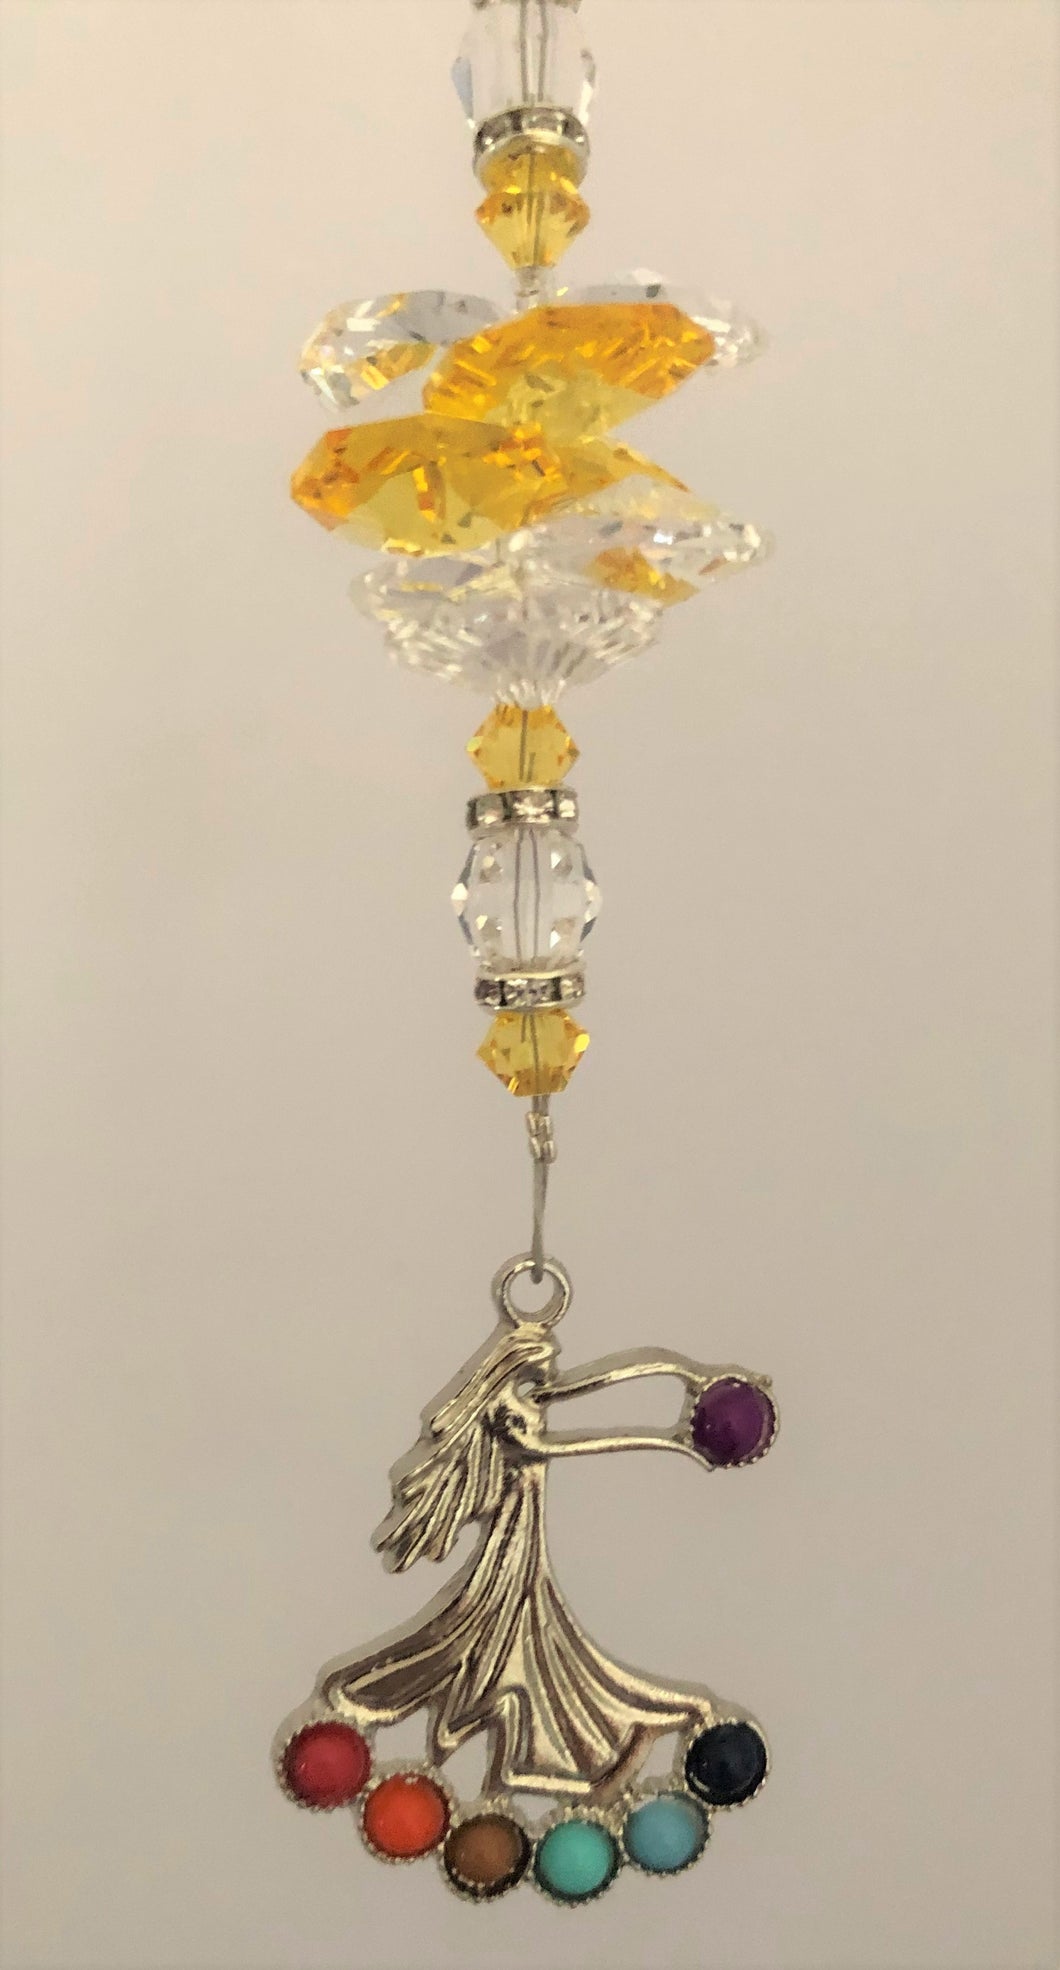 This beautiful Chakra girl suncatcher which is decorated with crystals and Citrine